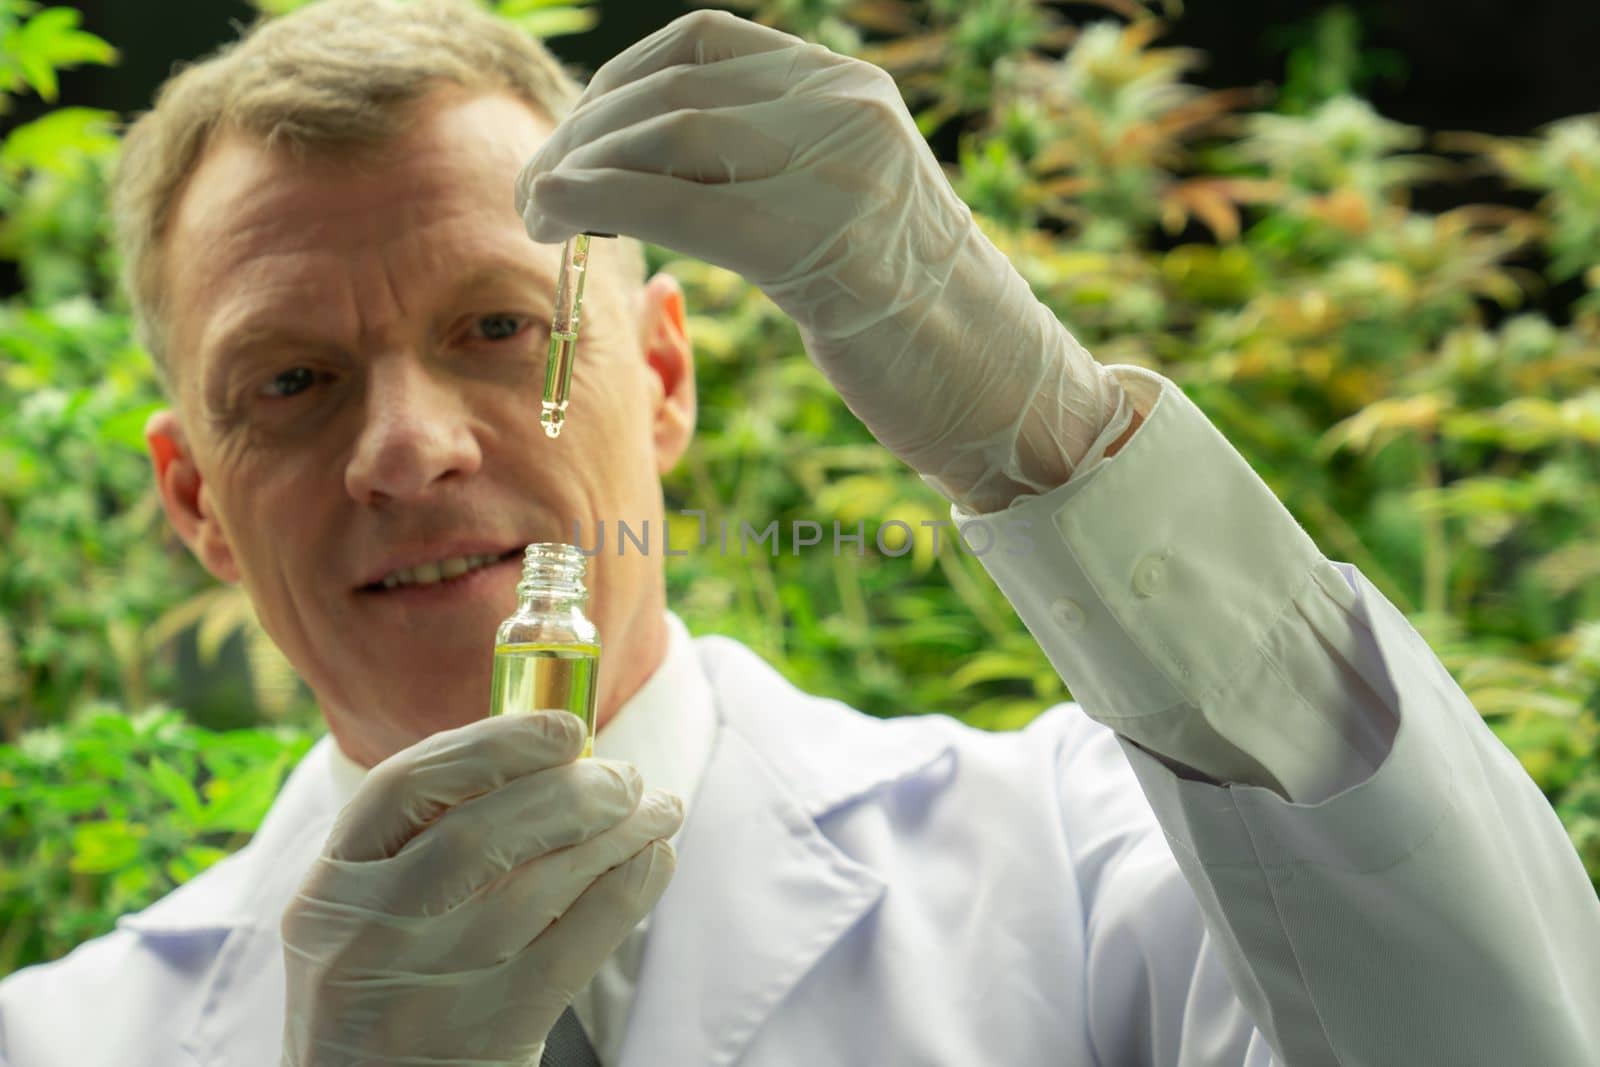 Scientist inspecting CBD oil from a glass bottle while holding a dropper lid full of CBD oil with gratifying cannabis plants growing within an indoor farm in the background.